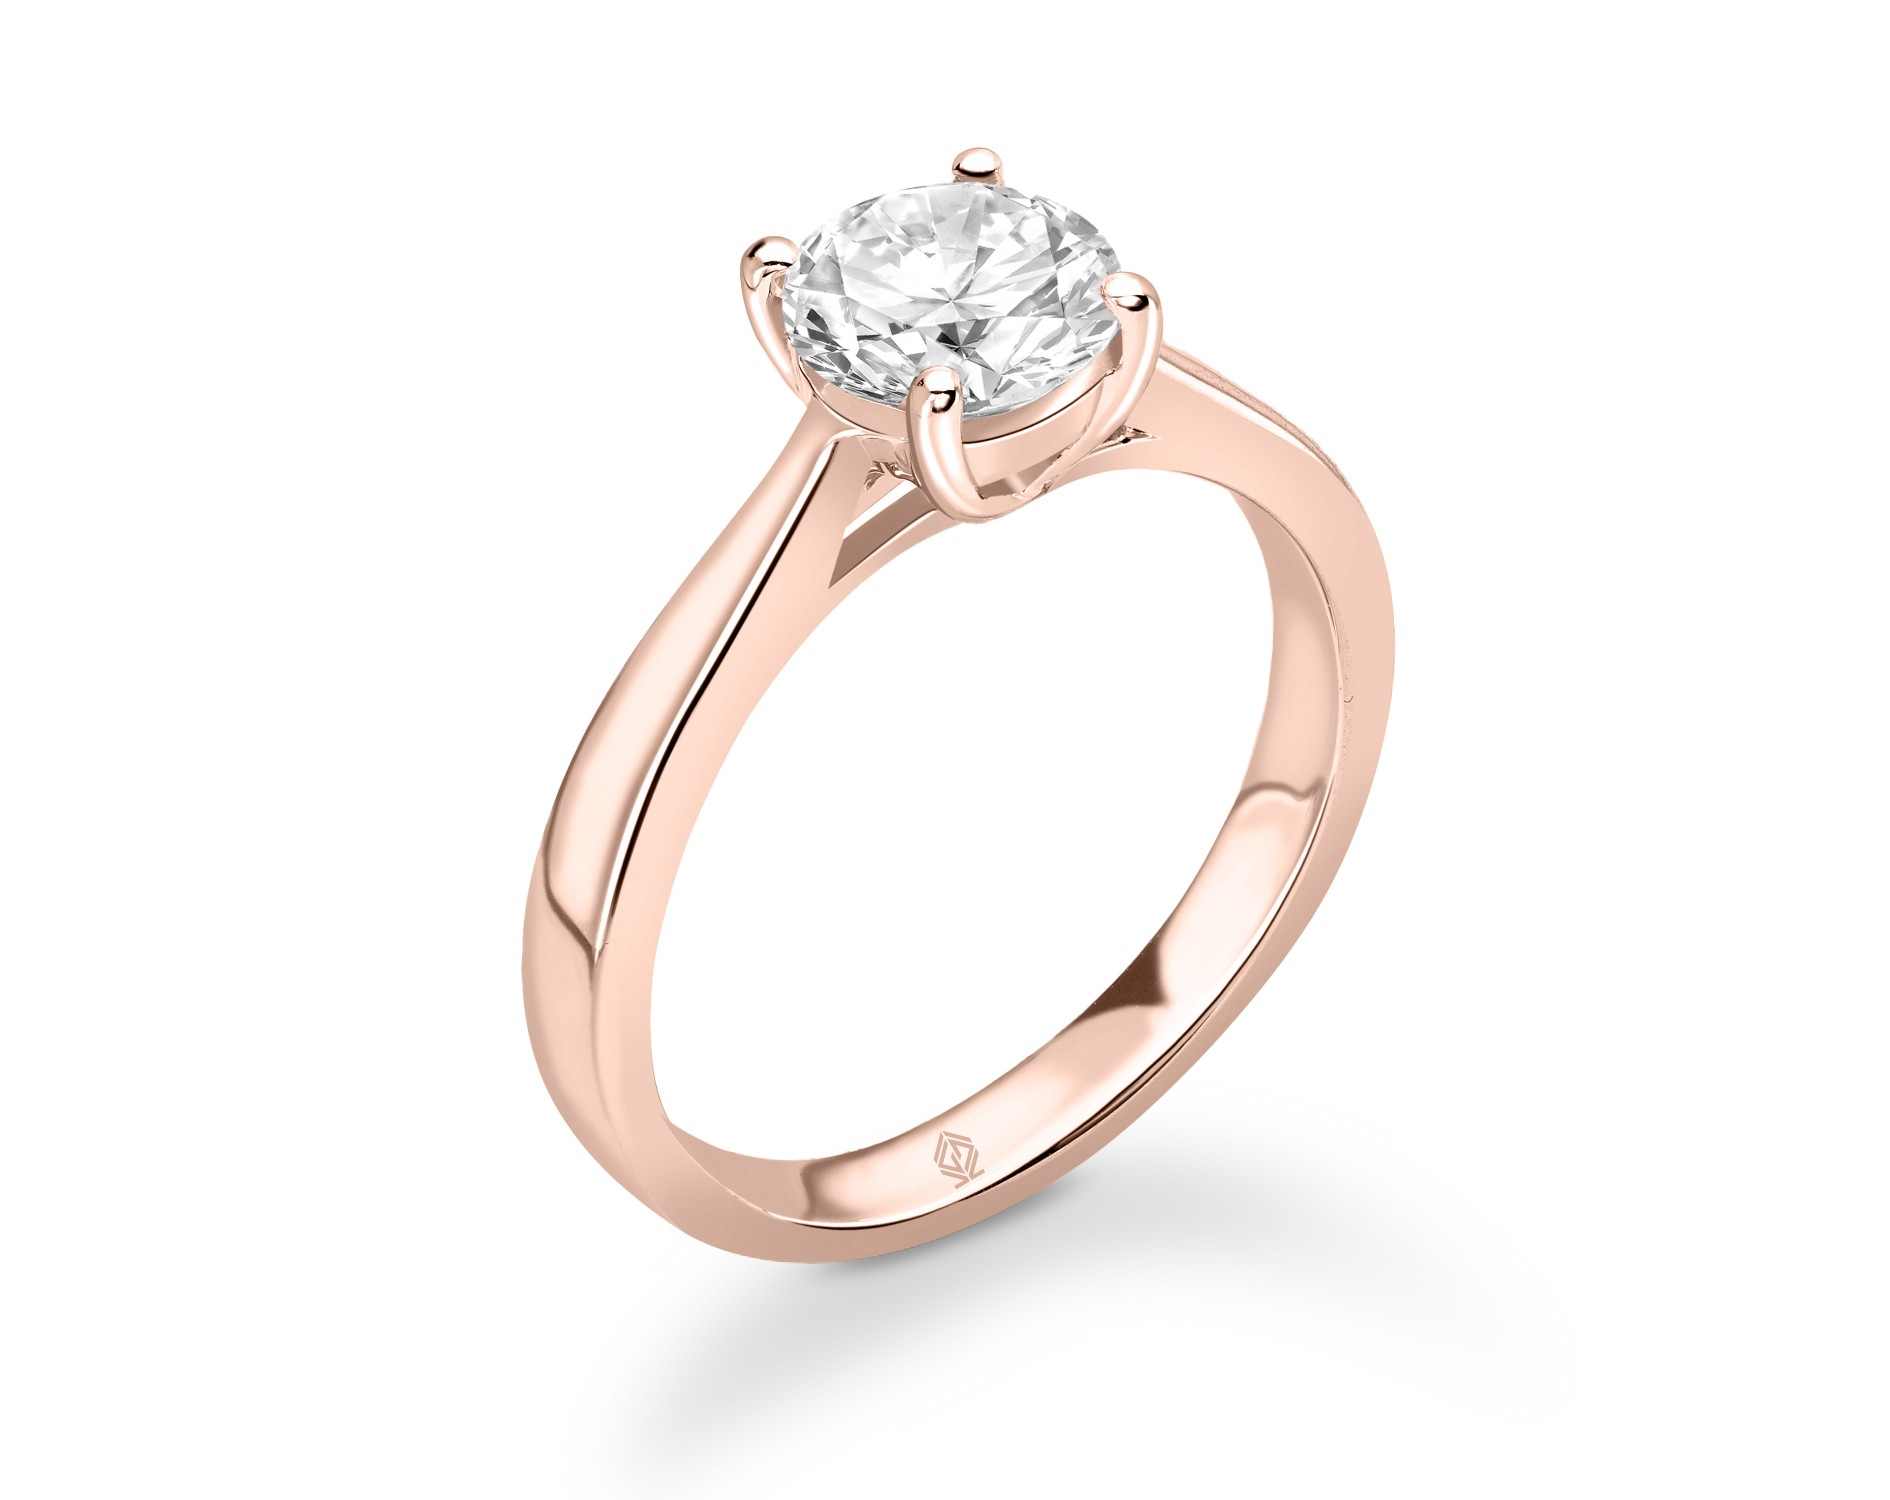 18K ROSE GOLD 4 PRONGS SOLITAIRE ROUND CUT DIAMOND WITH PLATINUM SHANK ENGAGEMENT RING